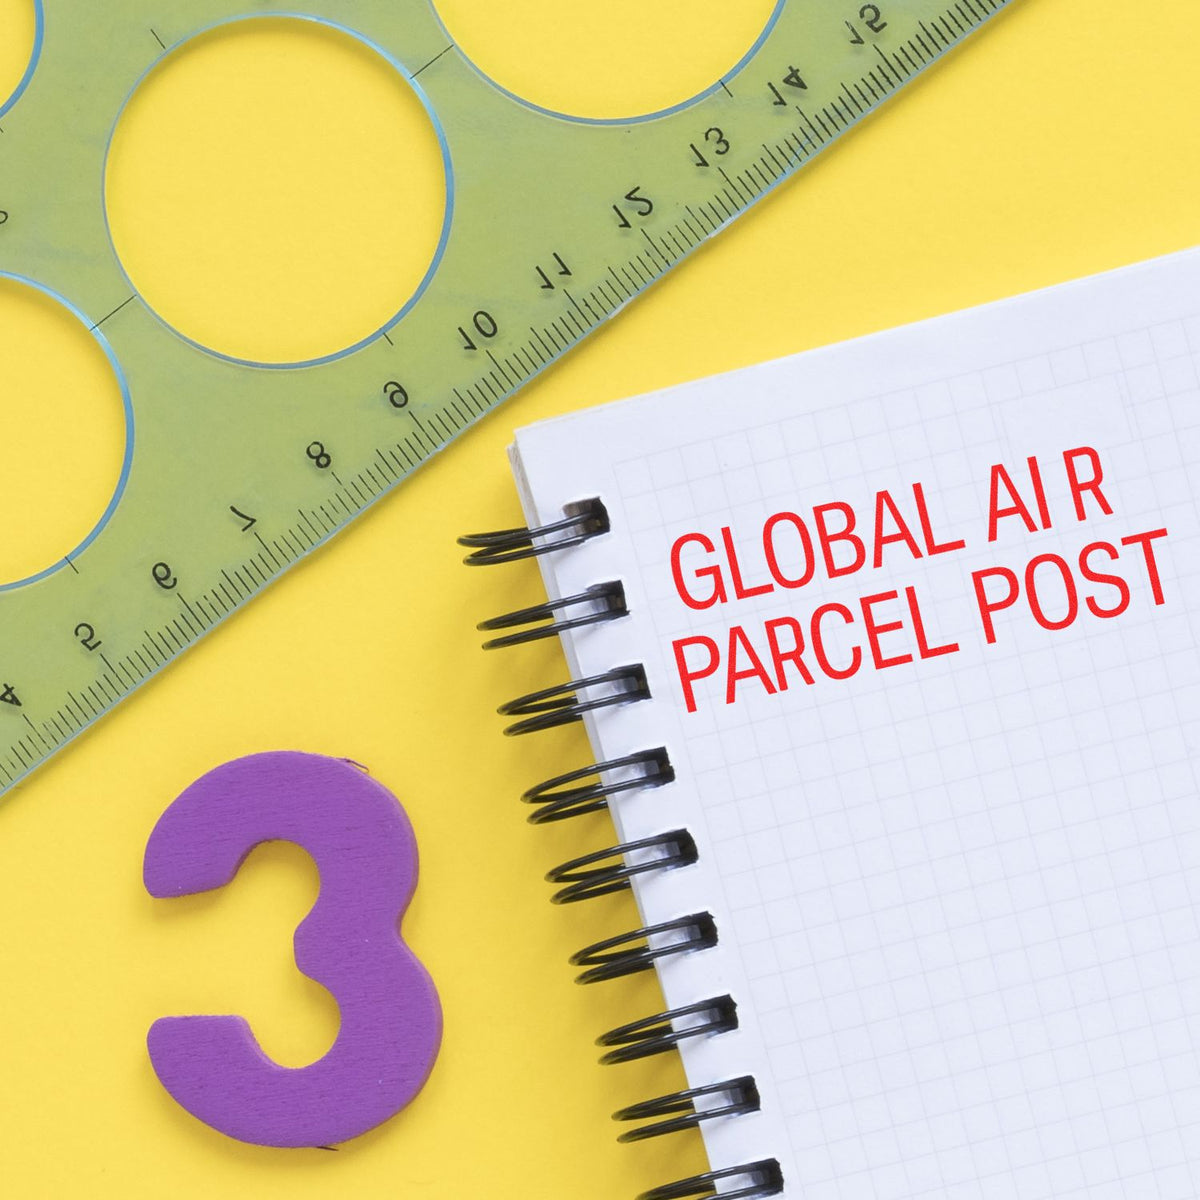 Large Global Air Parcel Post Rubber Stamp In Use Photo